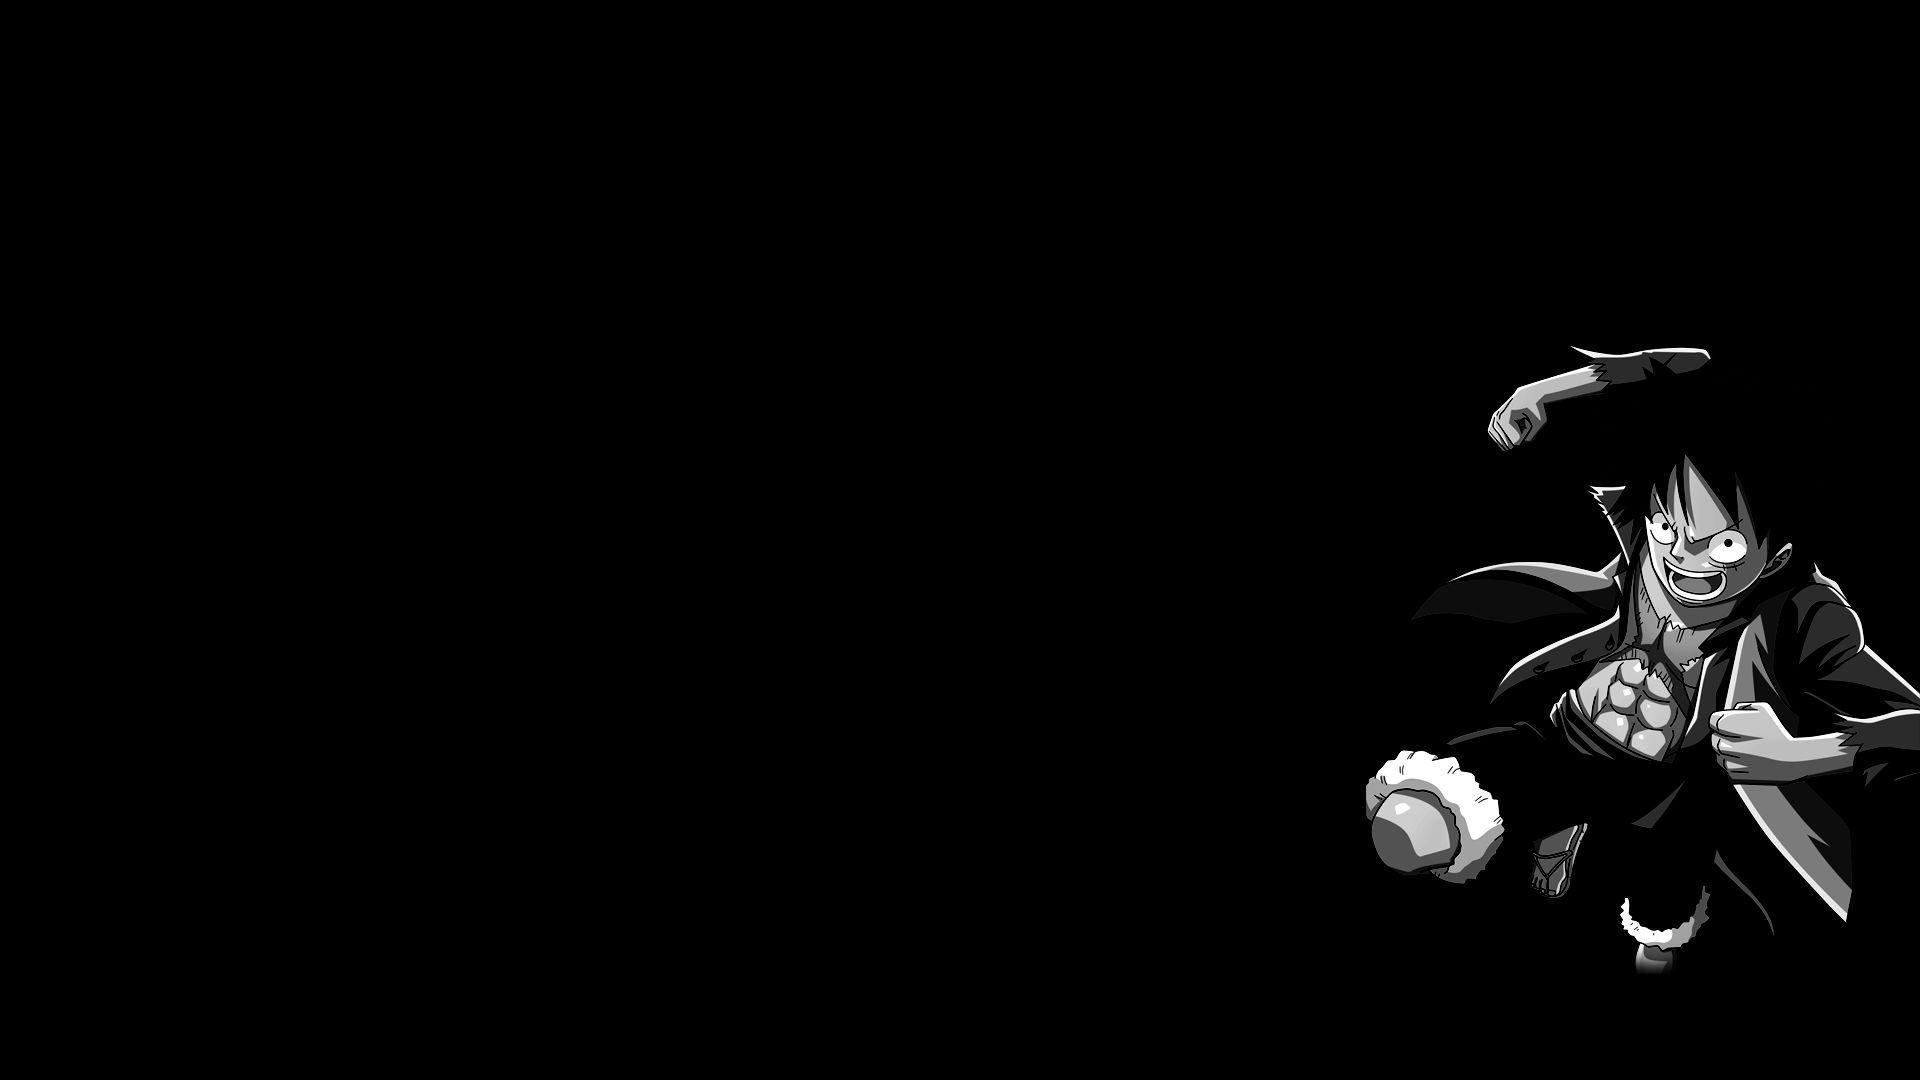 Luffy Wallpapers Hd Black And White.